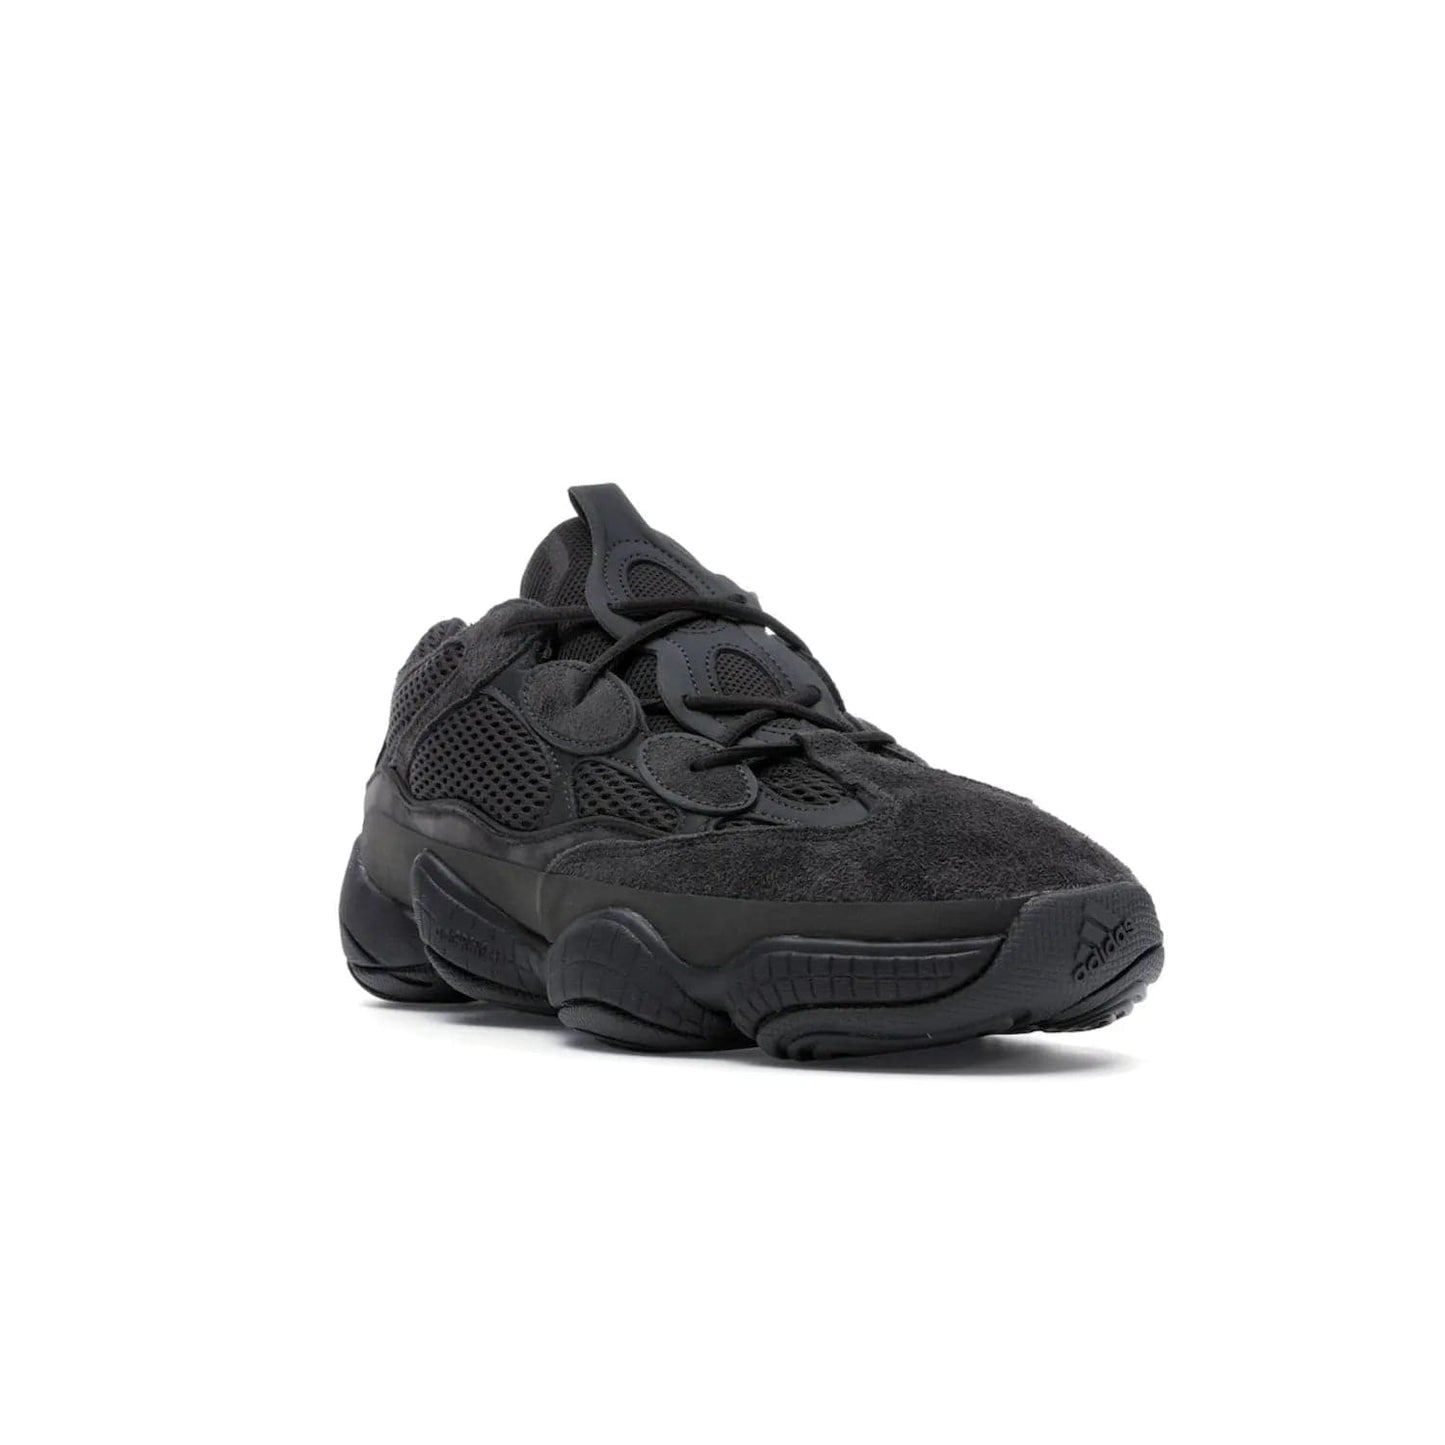 adidas Yeezy 500 Utility Black - Image 7 - Only at www.BallersClubKickz.com - Iconic adidas Yeezy 500 Utility Black in All-Black colorway. Durable black mesh and suede upper with adiPRENE® sole delivers comfort and support. Be unstoppable with the Yeezy 500 Utility Black. Released July 2018.